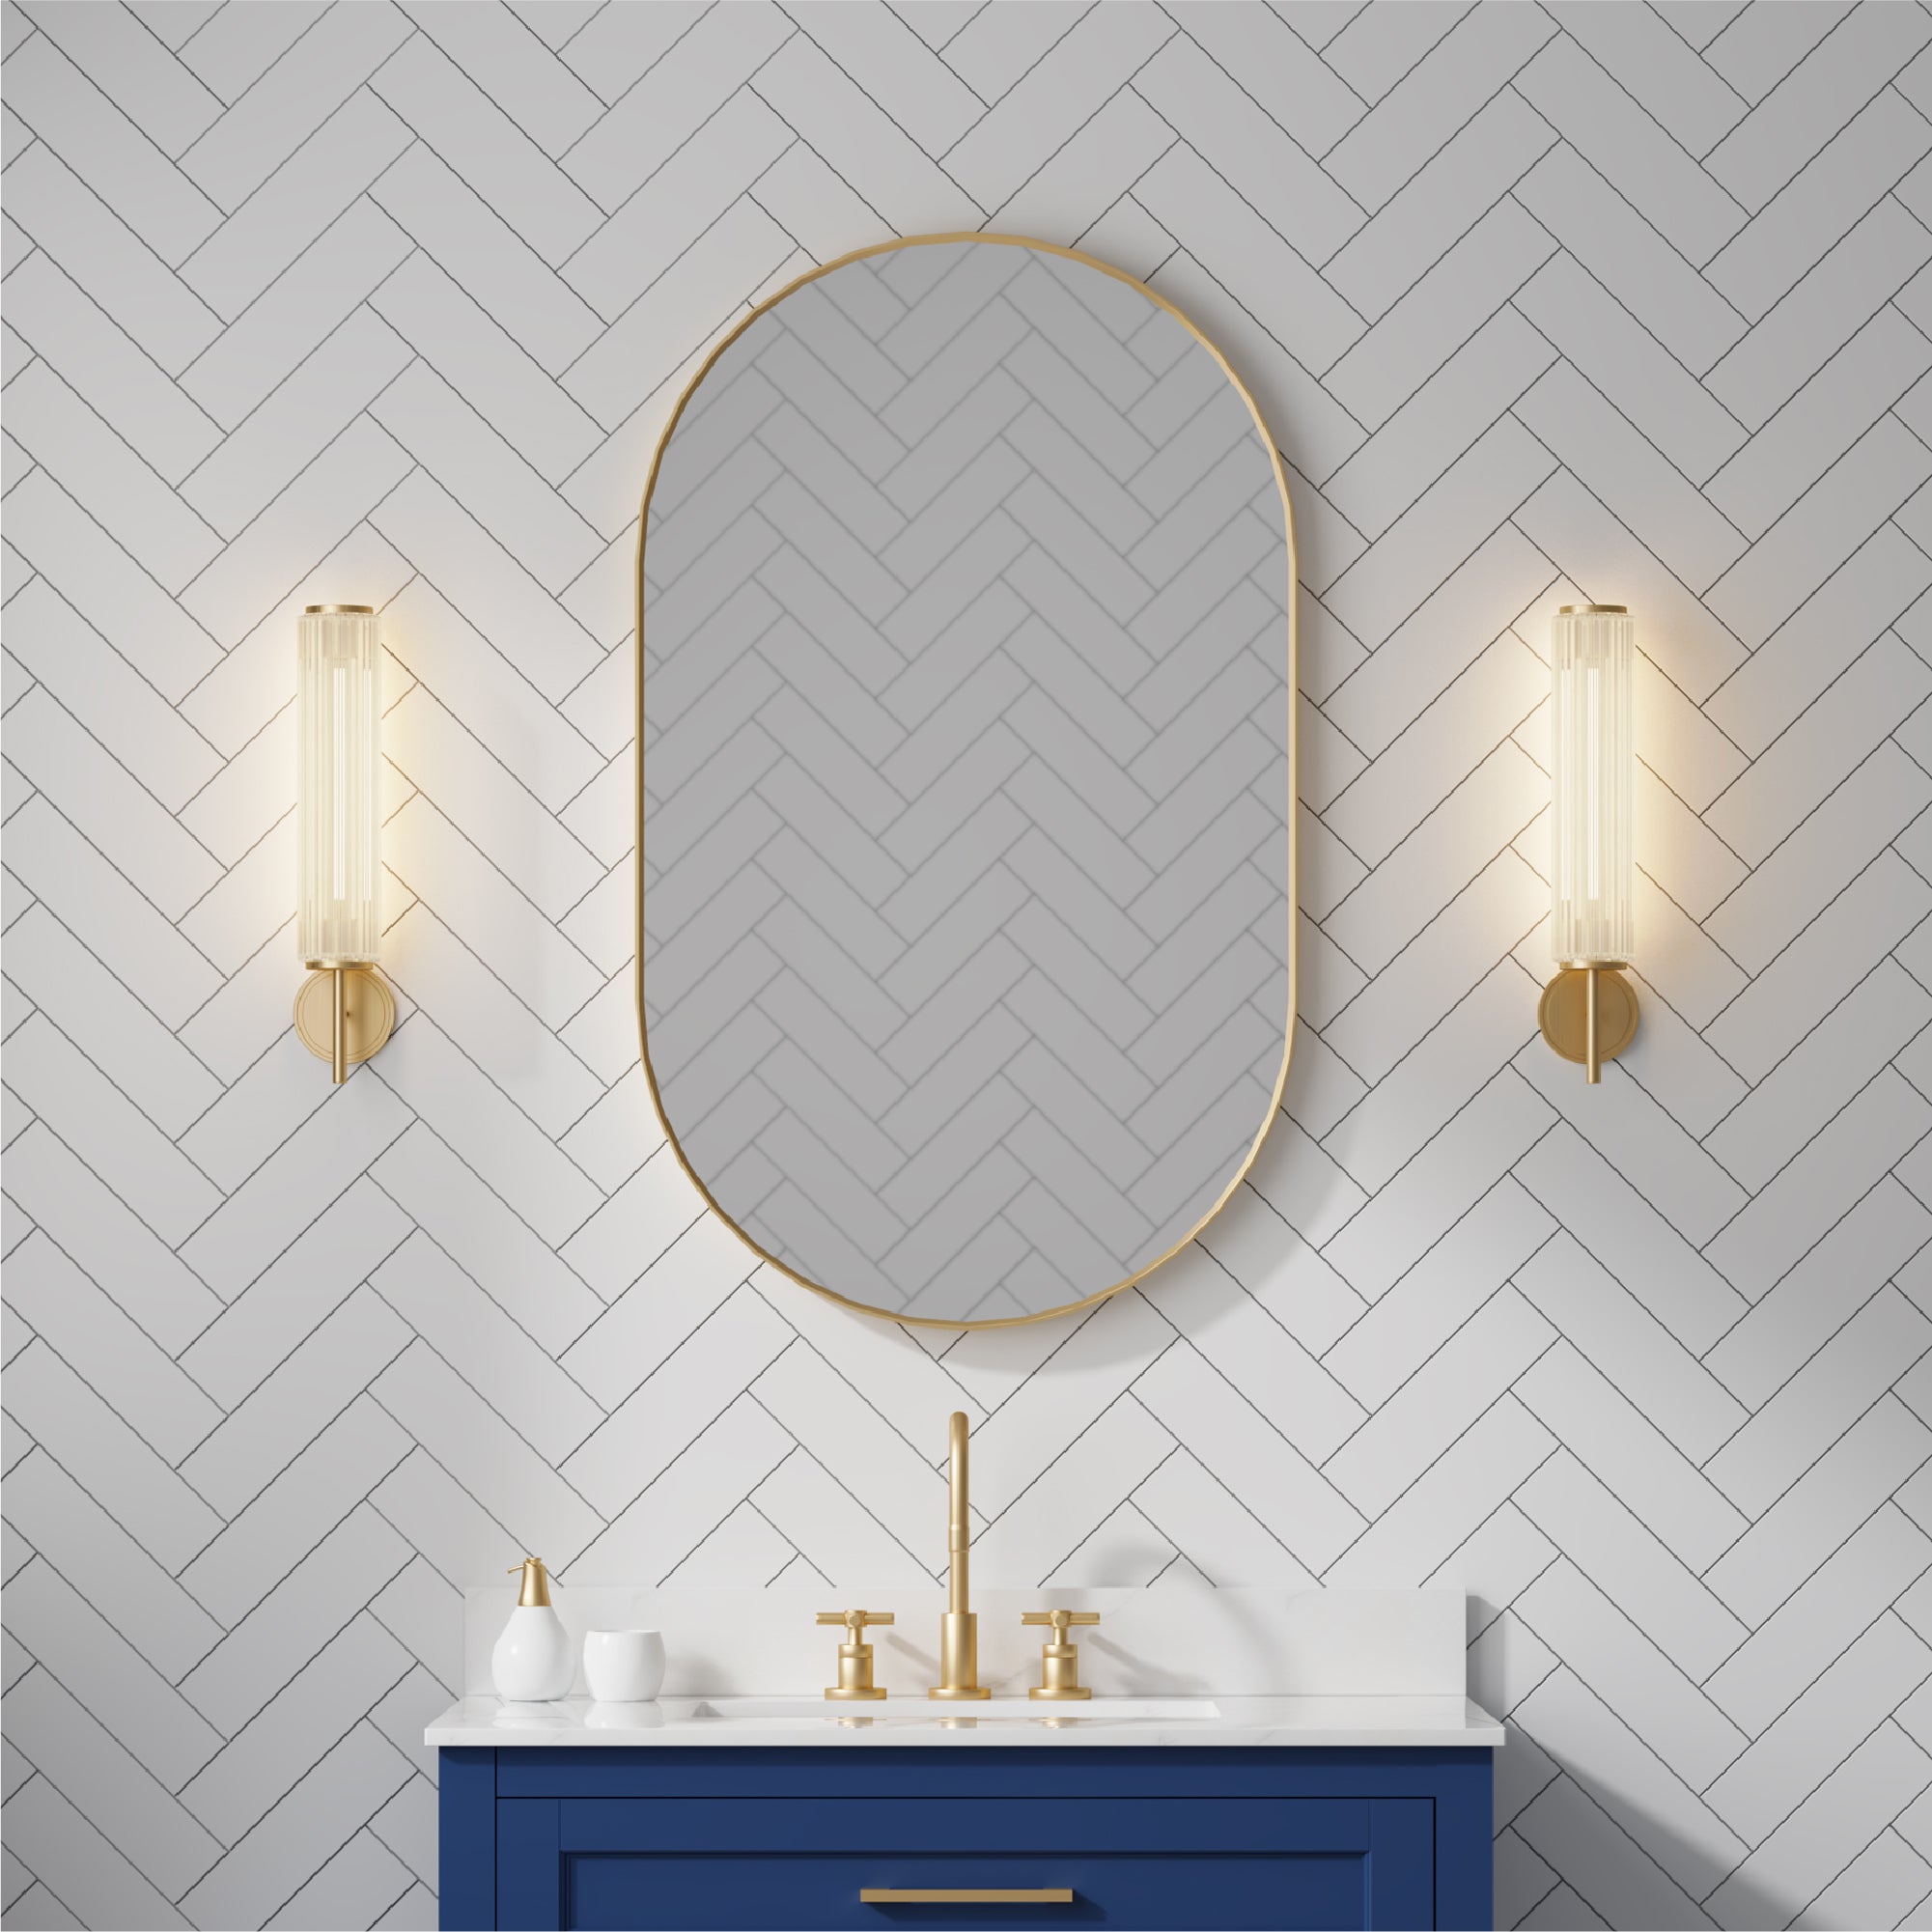 24 in. W x 40 in. H Oval Framed Wall Mount Bathroom Vanity Mirror in Brushed Gold